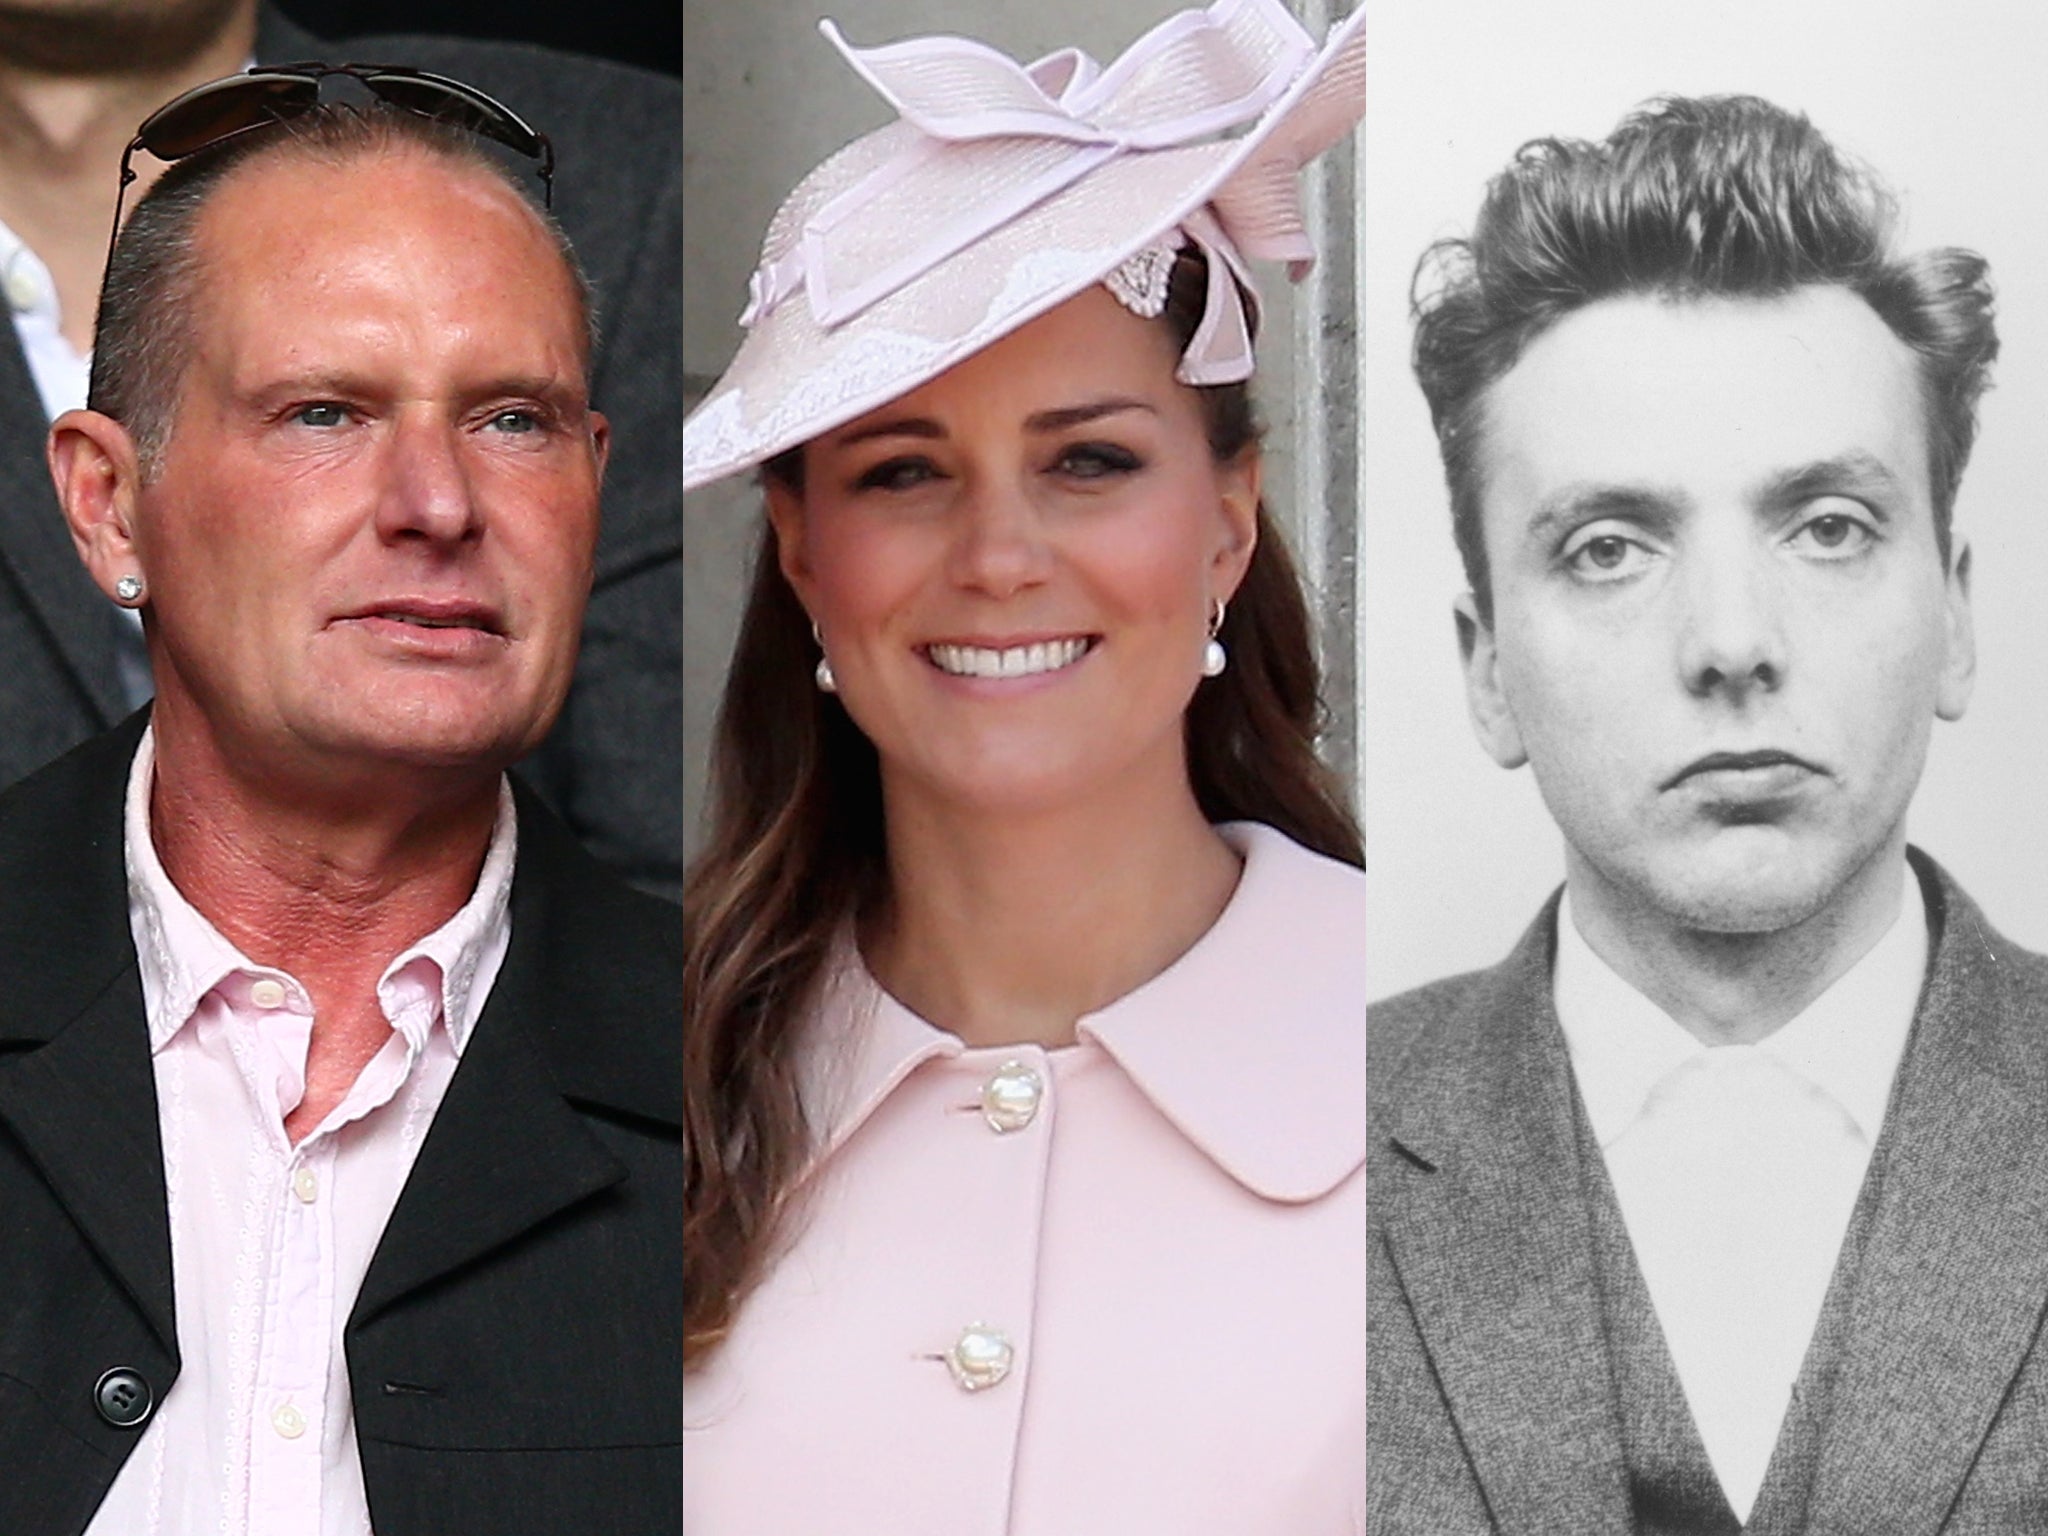 Paul Goscoigne, the Duchess of Cambridge and Ian Brady are all thought to have been victims of alleged corrupt dealings between journalists and public officials